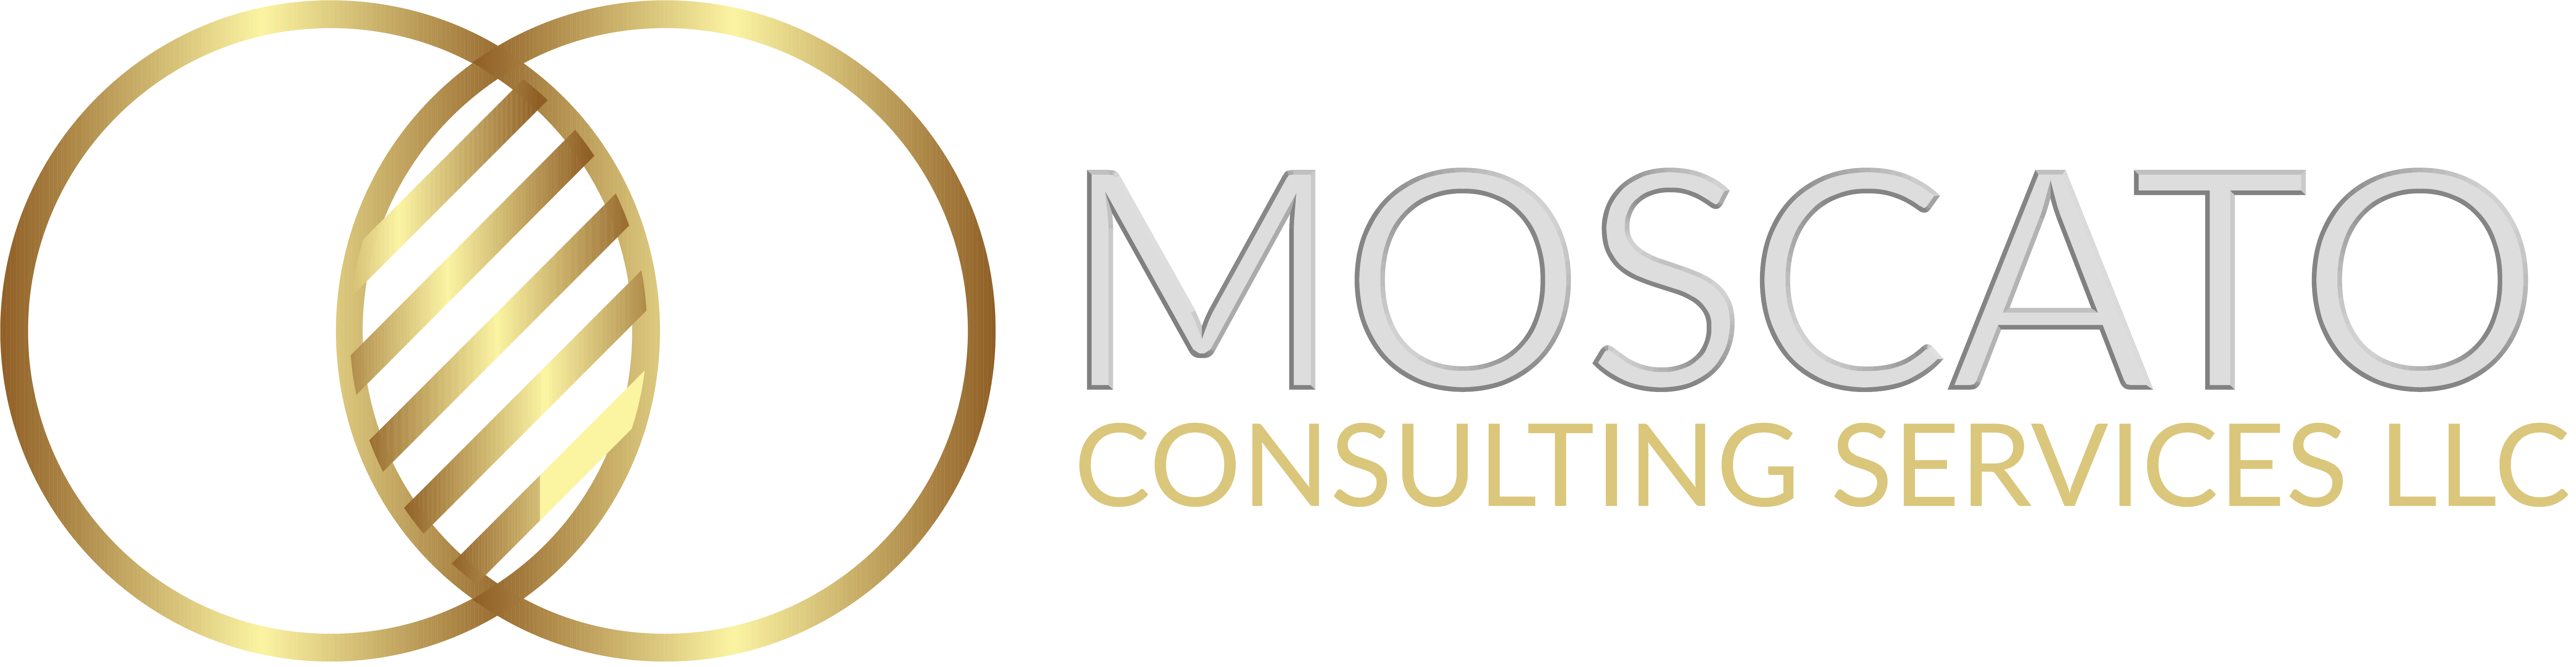 Moscato Consulting LLC